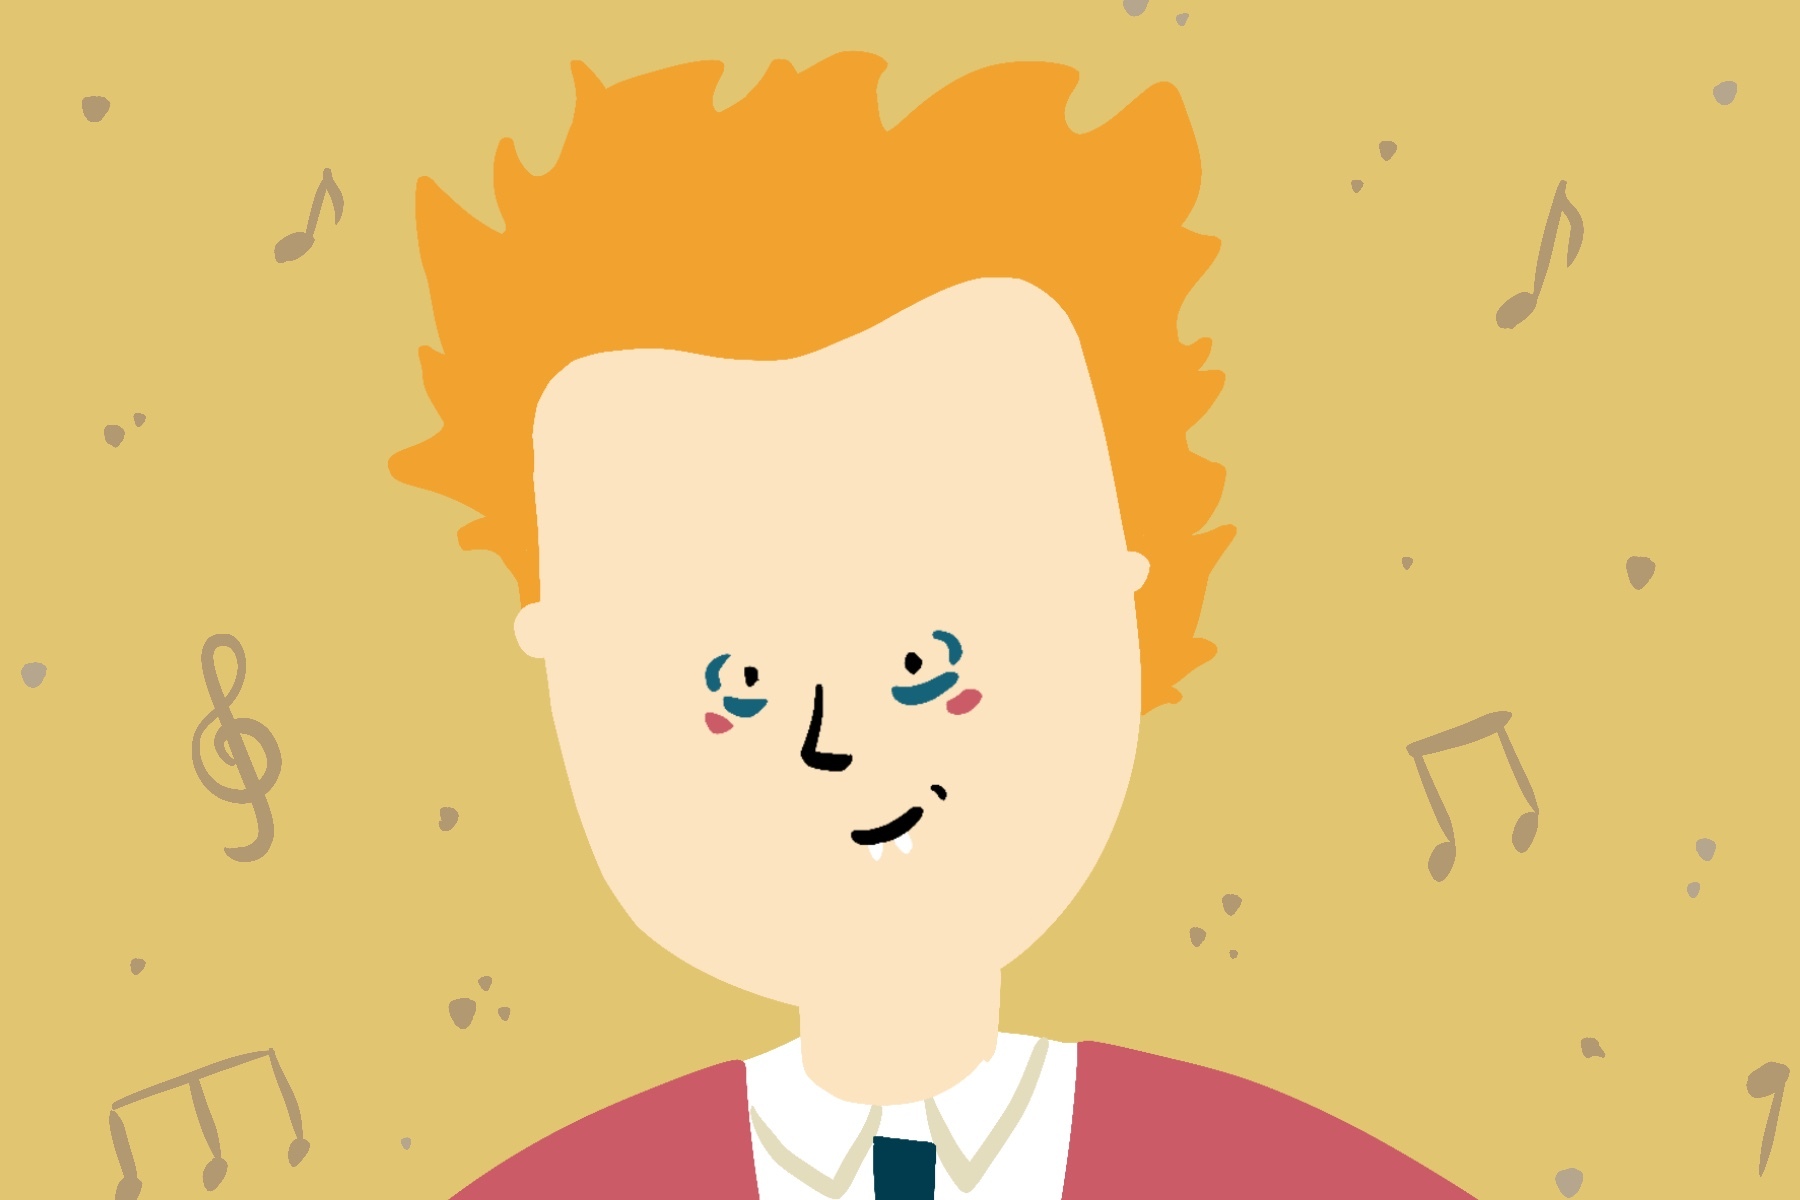 An illustration of Sheeran in his latest music video, Bad Habits